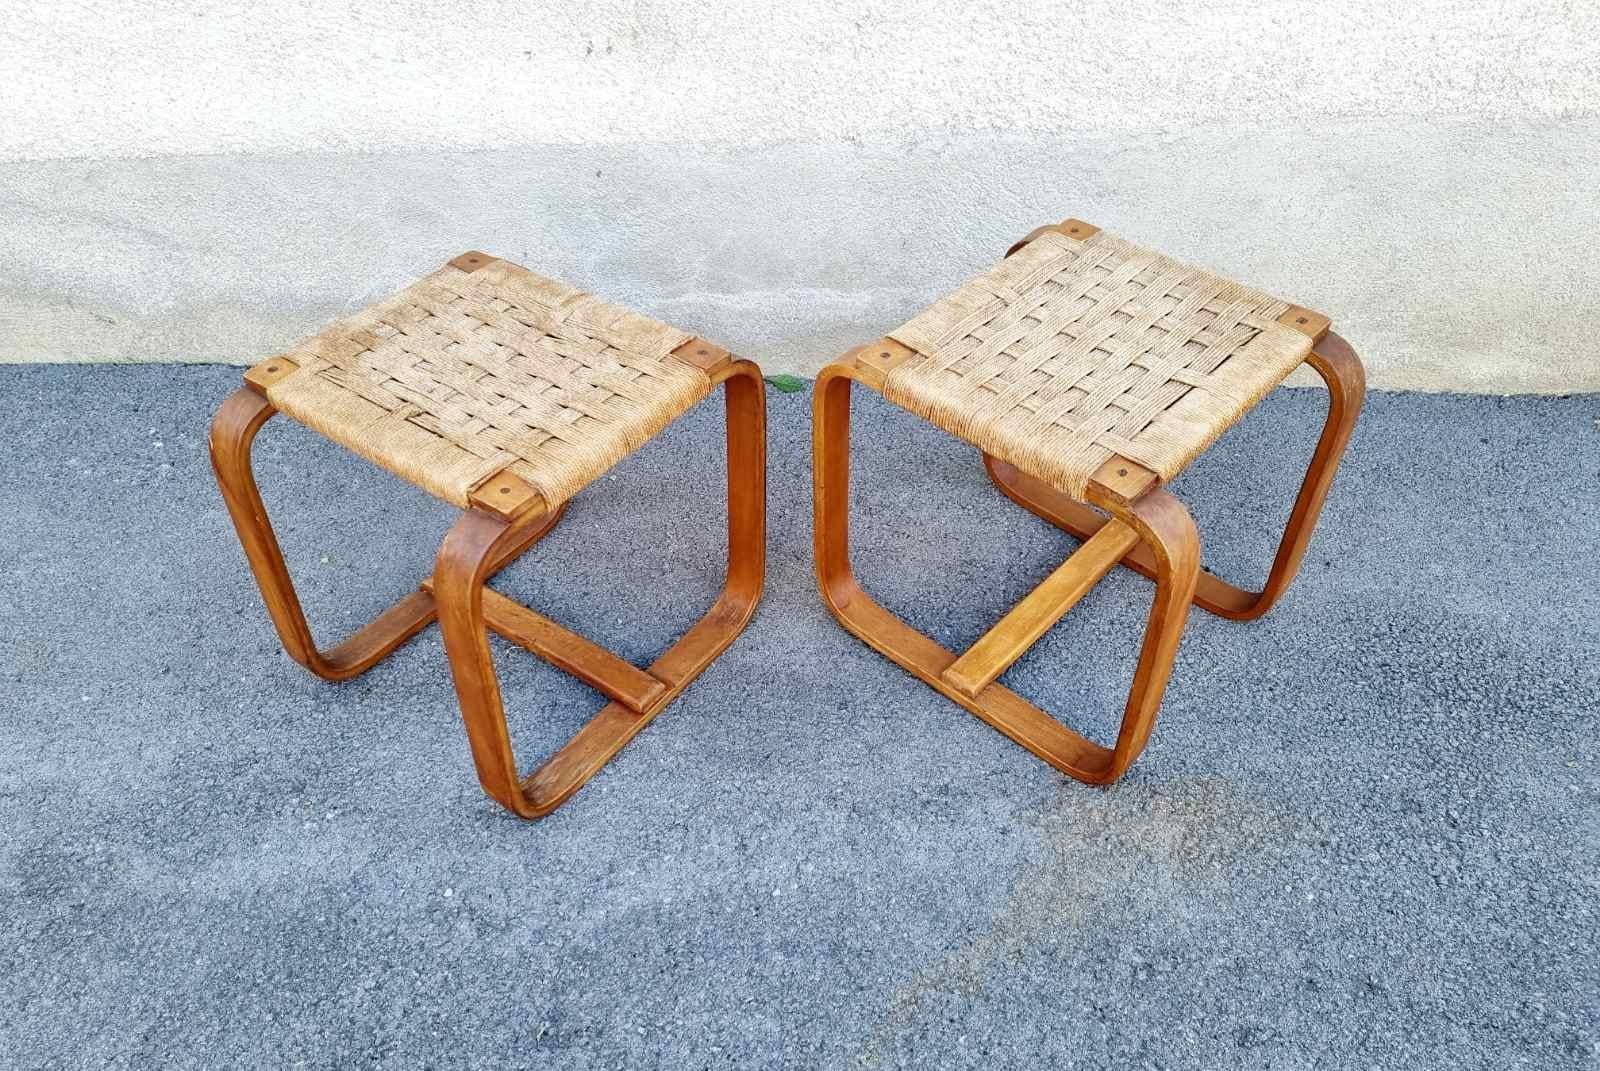 Rare Pair of Stools by Giuseppe Pagano Pogatschnig for Gino Maggioni, Italy 40s For Sale 2